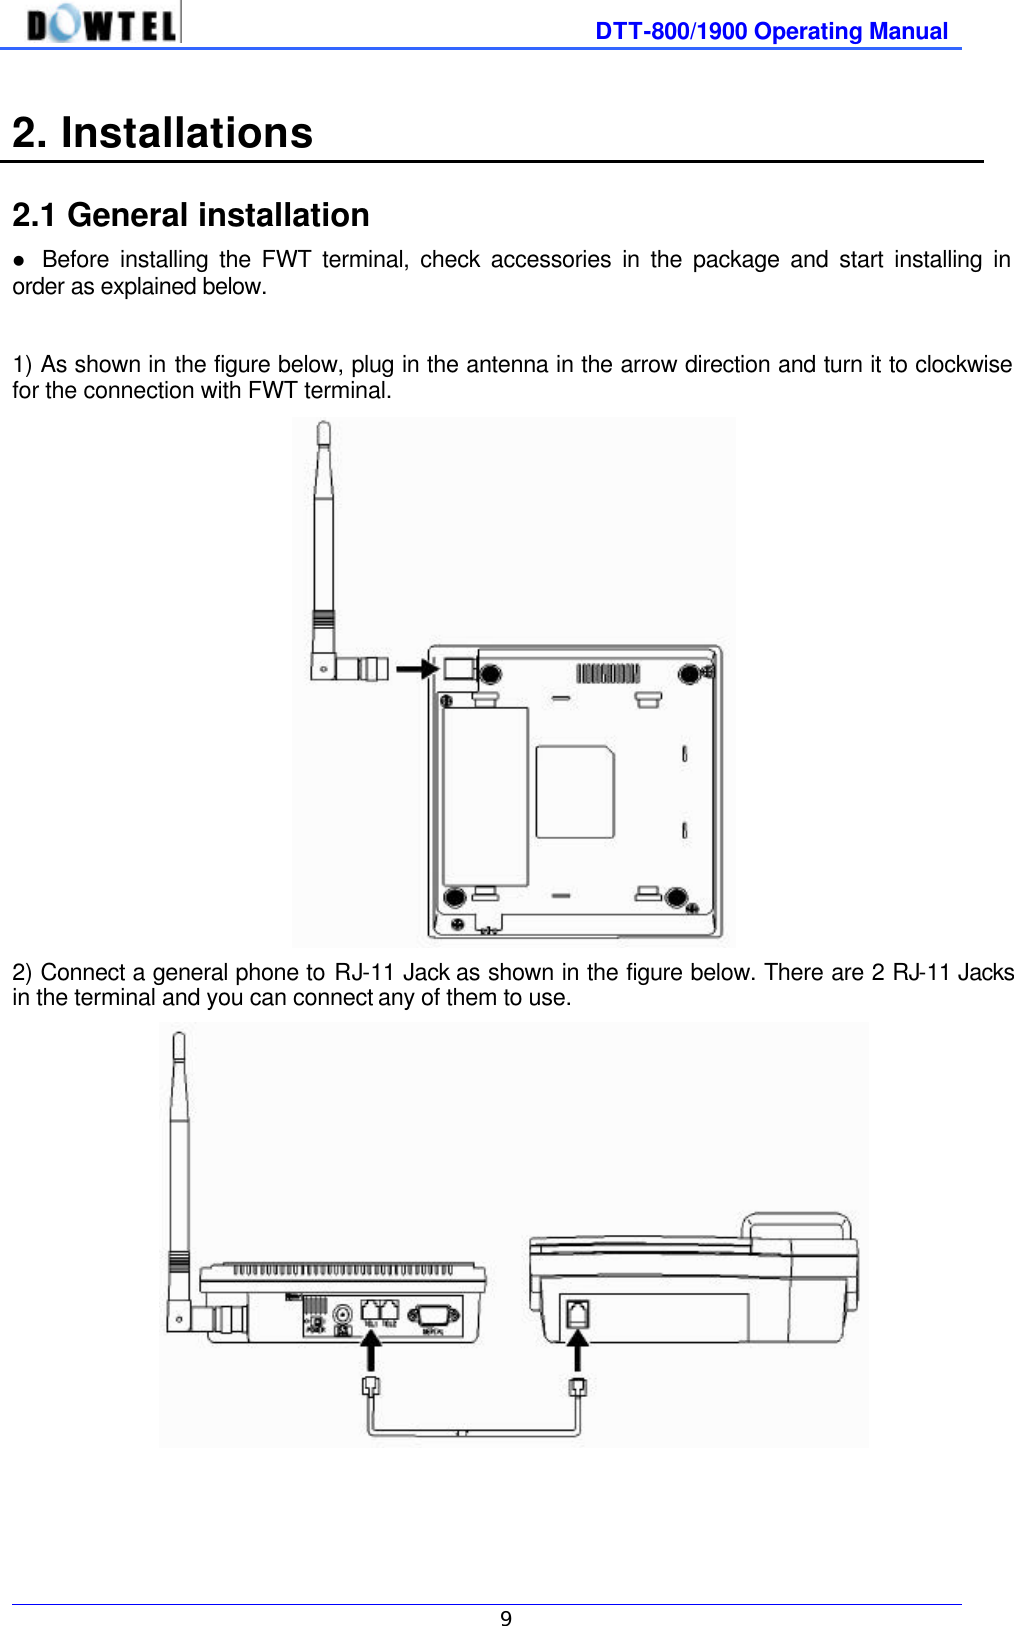              DTT-800/1900 Operating Manual   9  2. Installations    2.1 General installation l Before installing the FWT terminal, check accessories in the package and start installing in order as explained below.  1) As shown in the figure below, plug in the antenna in the arrow direction and turn it to clockwise for the connection with FWT terminal.  2) Connect a general phone to RJ-11 Jack as shown in the figure below. There are 2 RJ-11 Jacks in the terminal and you can connect any of them to use.         